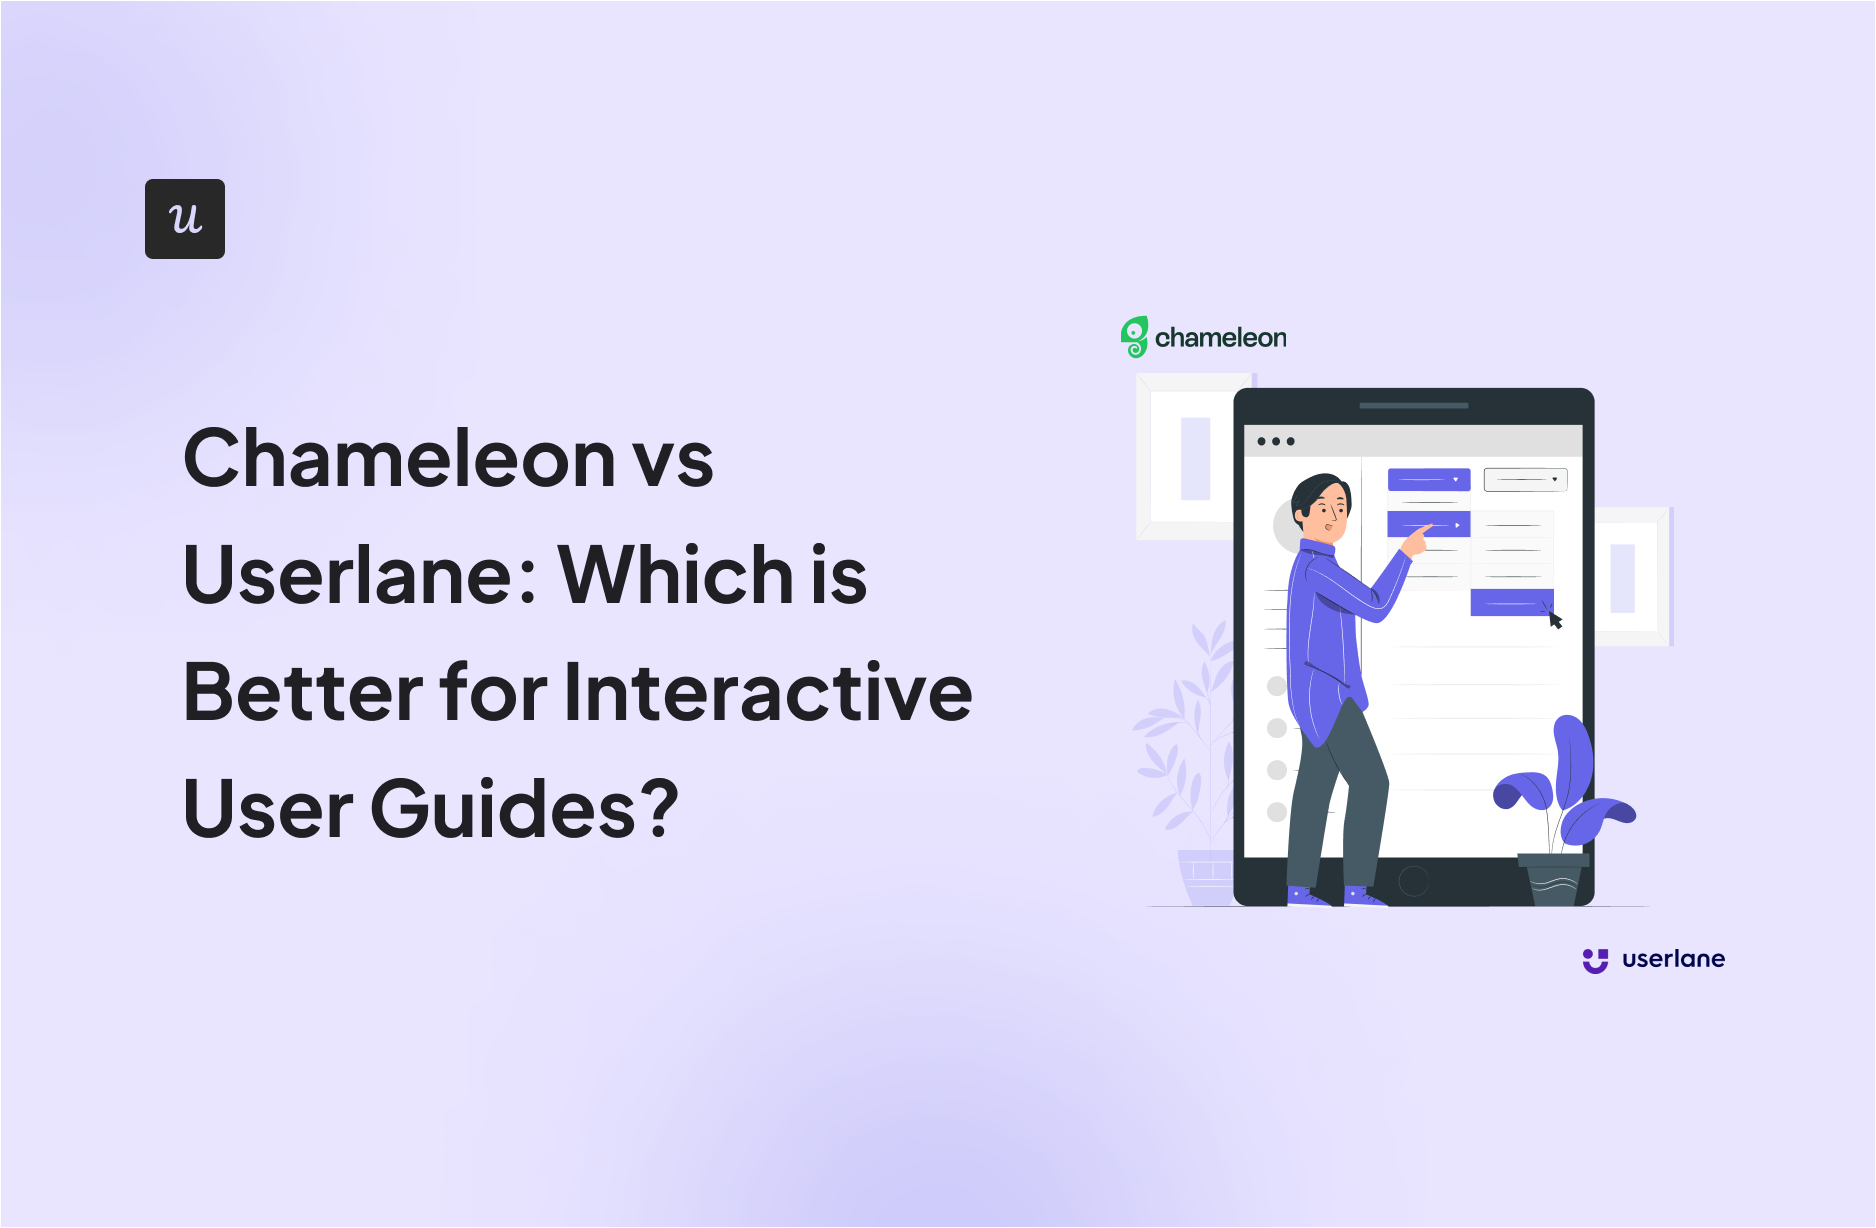 Chameleon vs Userlane: Which is Better for Interactive User Guides?